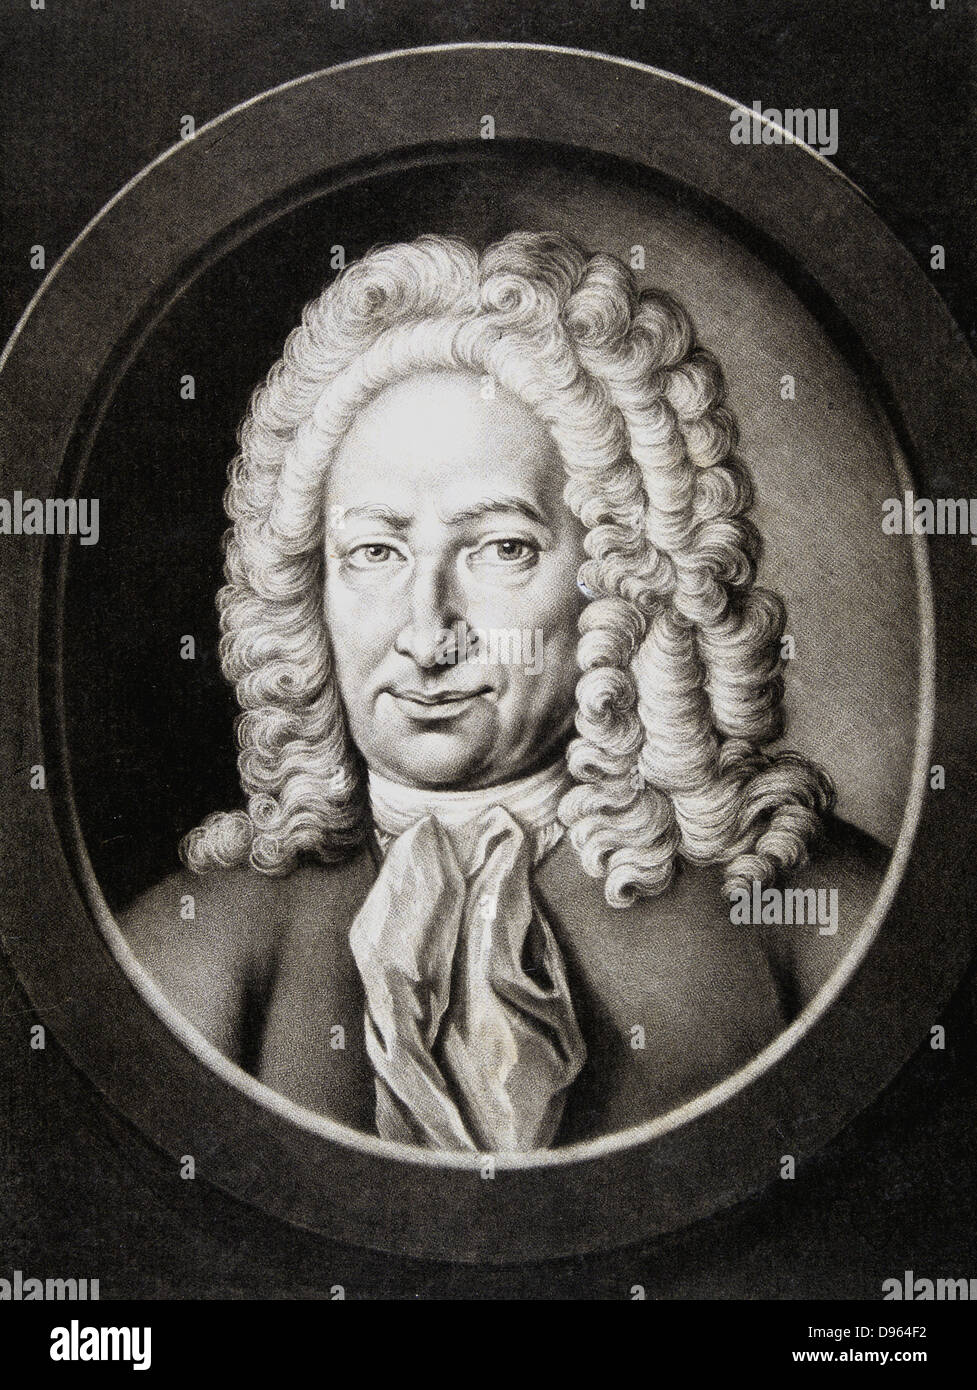 Gottfried Wilhelm von Leibniz (1646-1716).  German philosopher and mathematician. Published his system of infinitesimal calculus in 1684, three years before Newton who, however, claimed priority as inventor as his publication related to earlier work. The controversy was never settled. Mezzotint by Johann Elias Haid (1781) from portrait of 1714 by JG Auerbach. Stock Photo